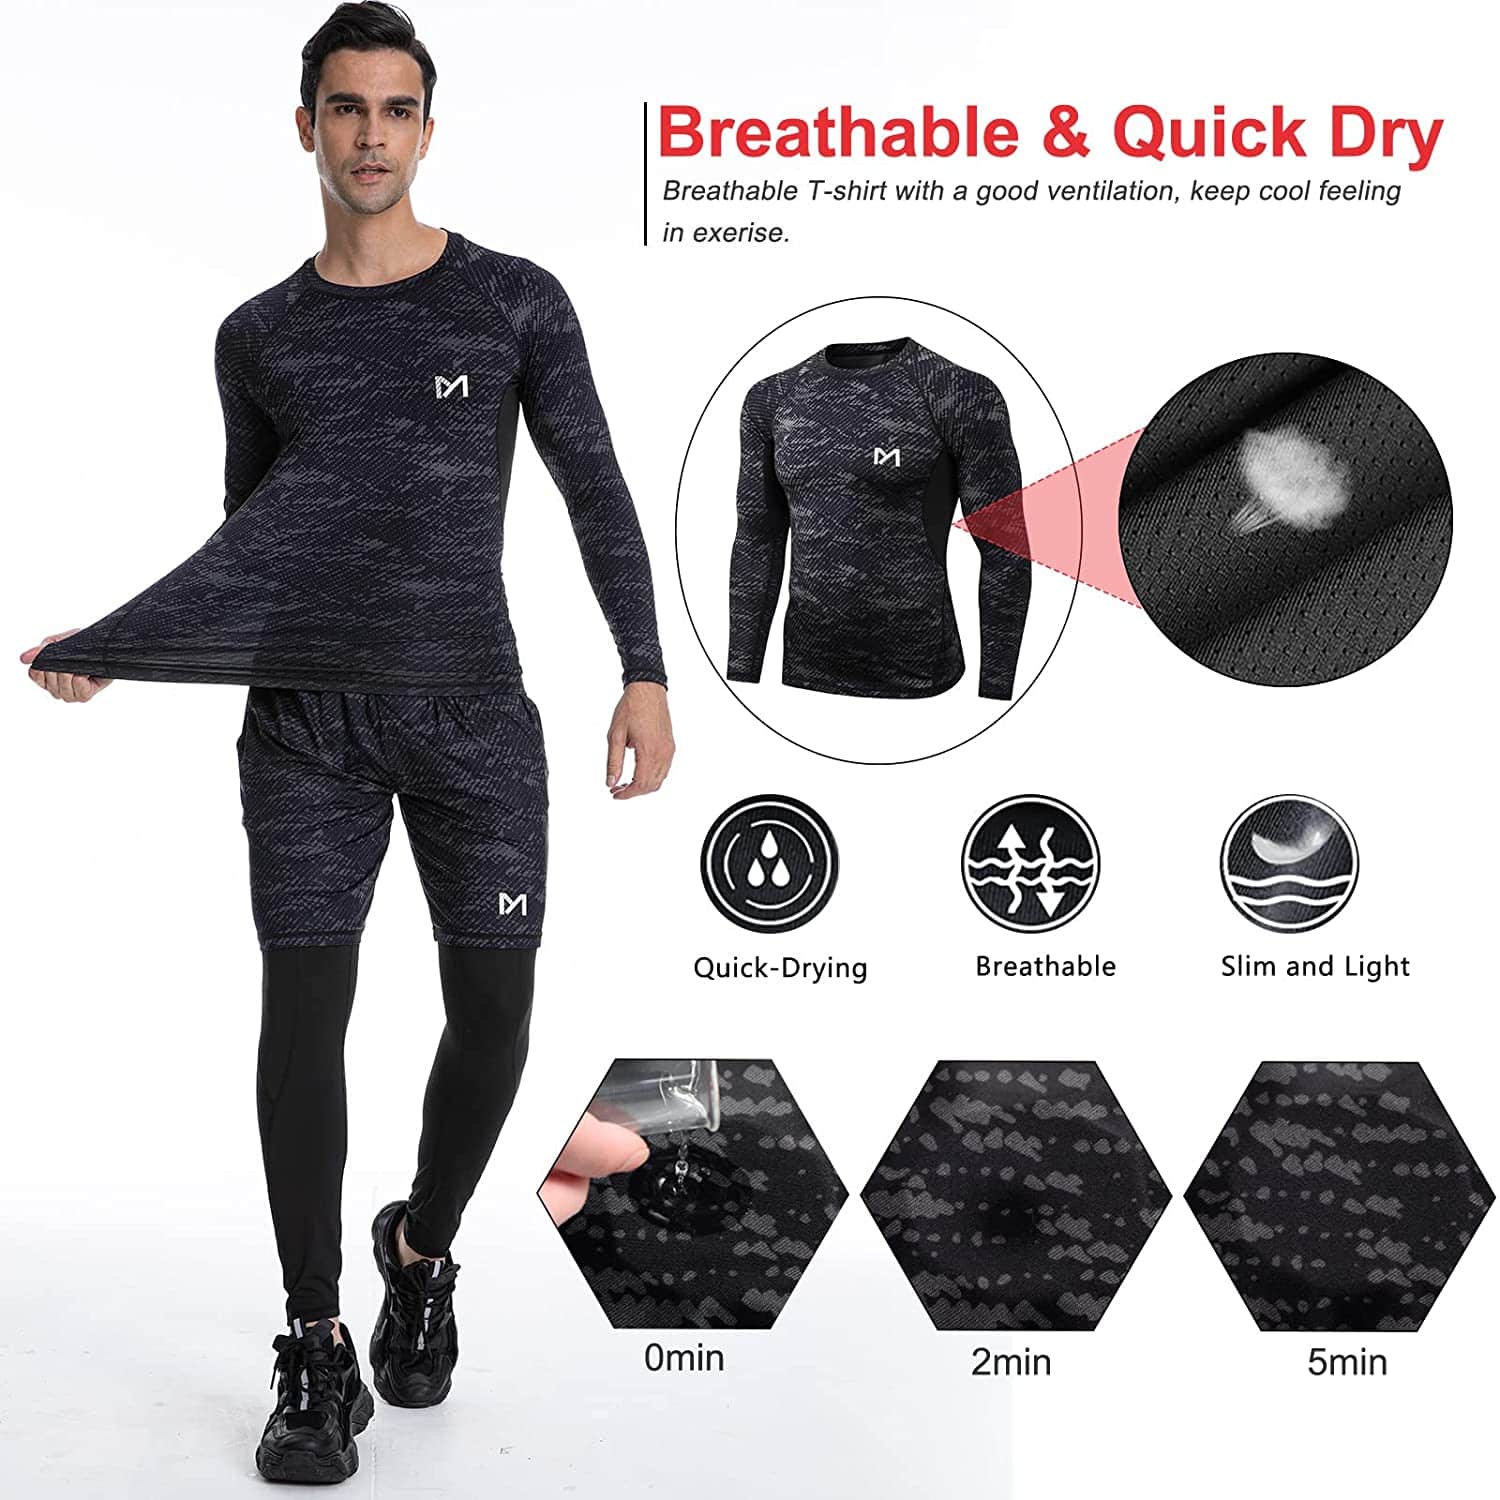 Tee Shirt Compression Homme - LEOCLOTHO - Running Fitness - Blanc -  Respirant - Manches Courtes